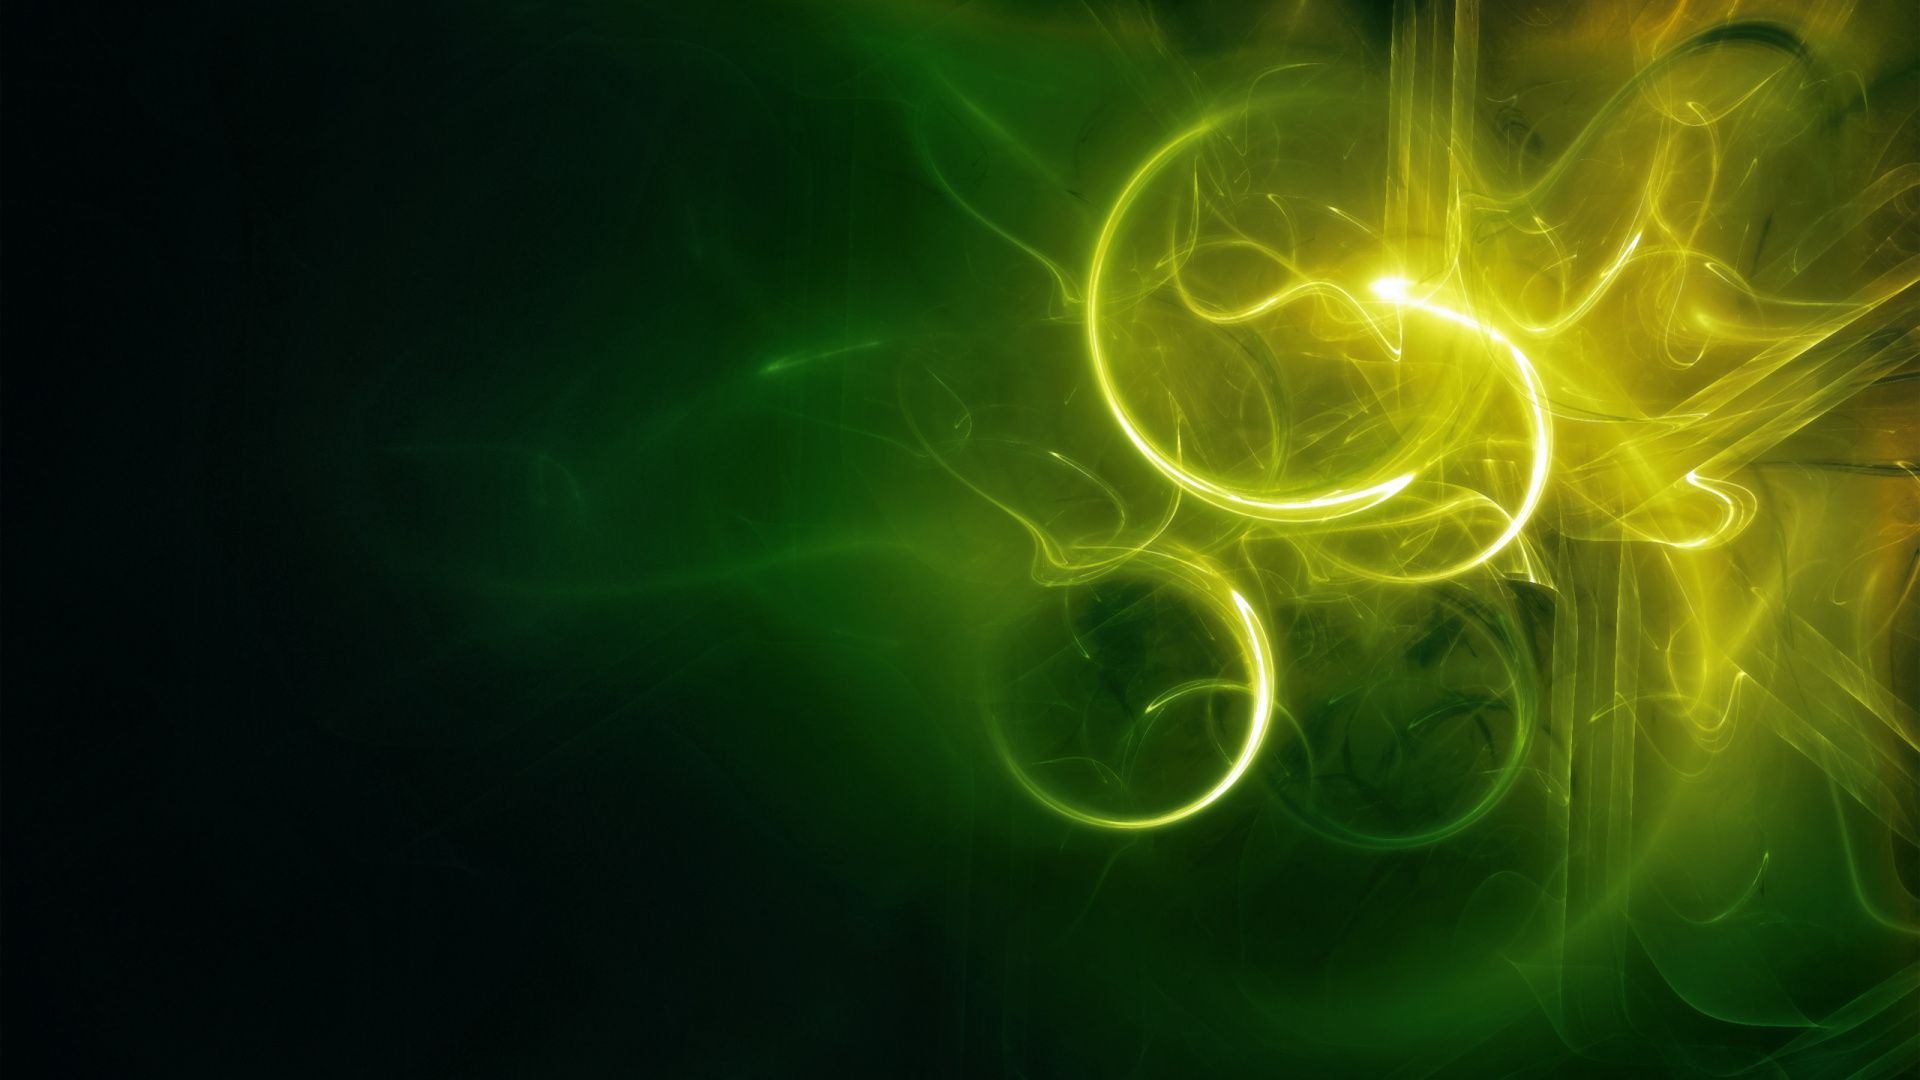 Green and Yellow Light Streaks. Wallpaper in 1920x1080 Resolution